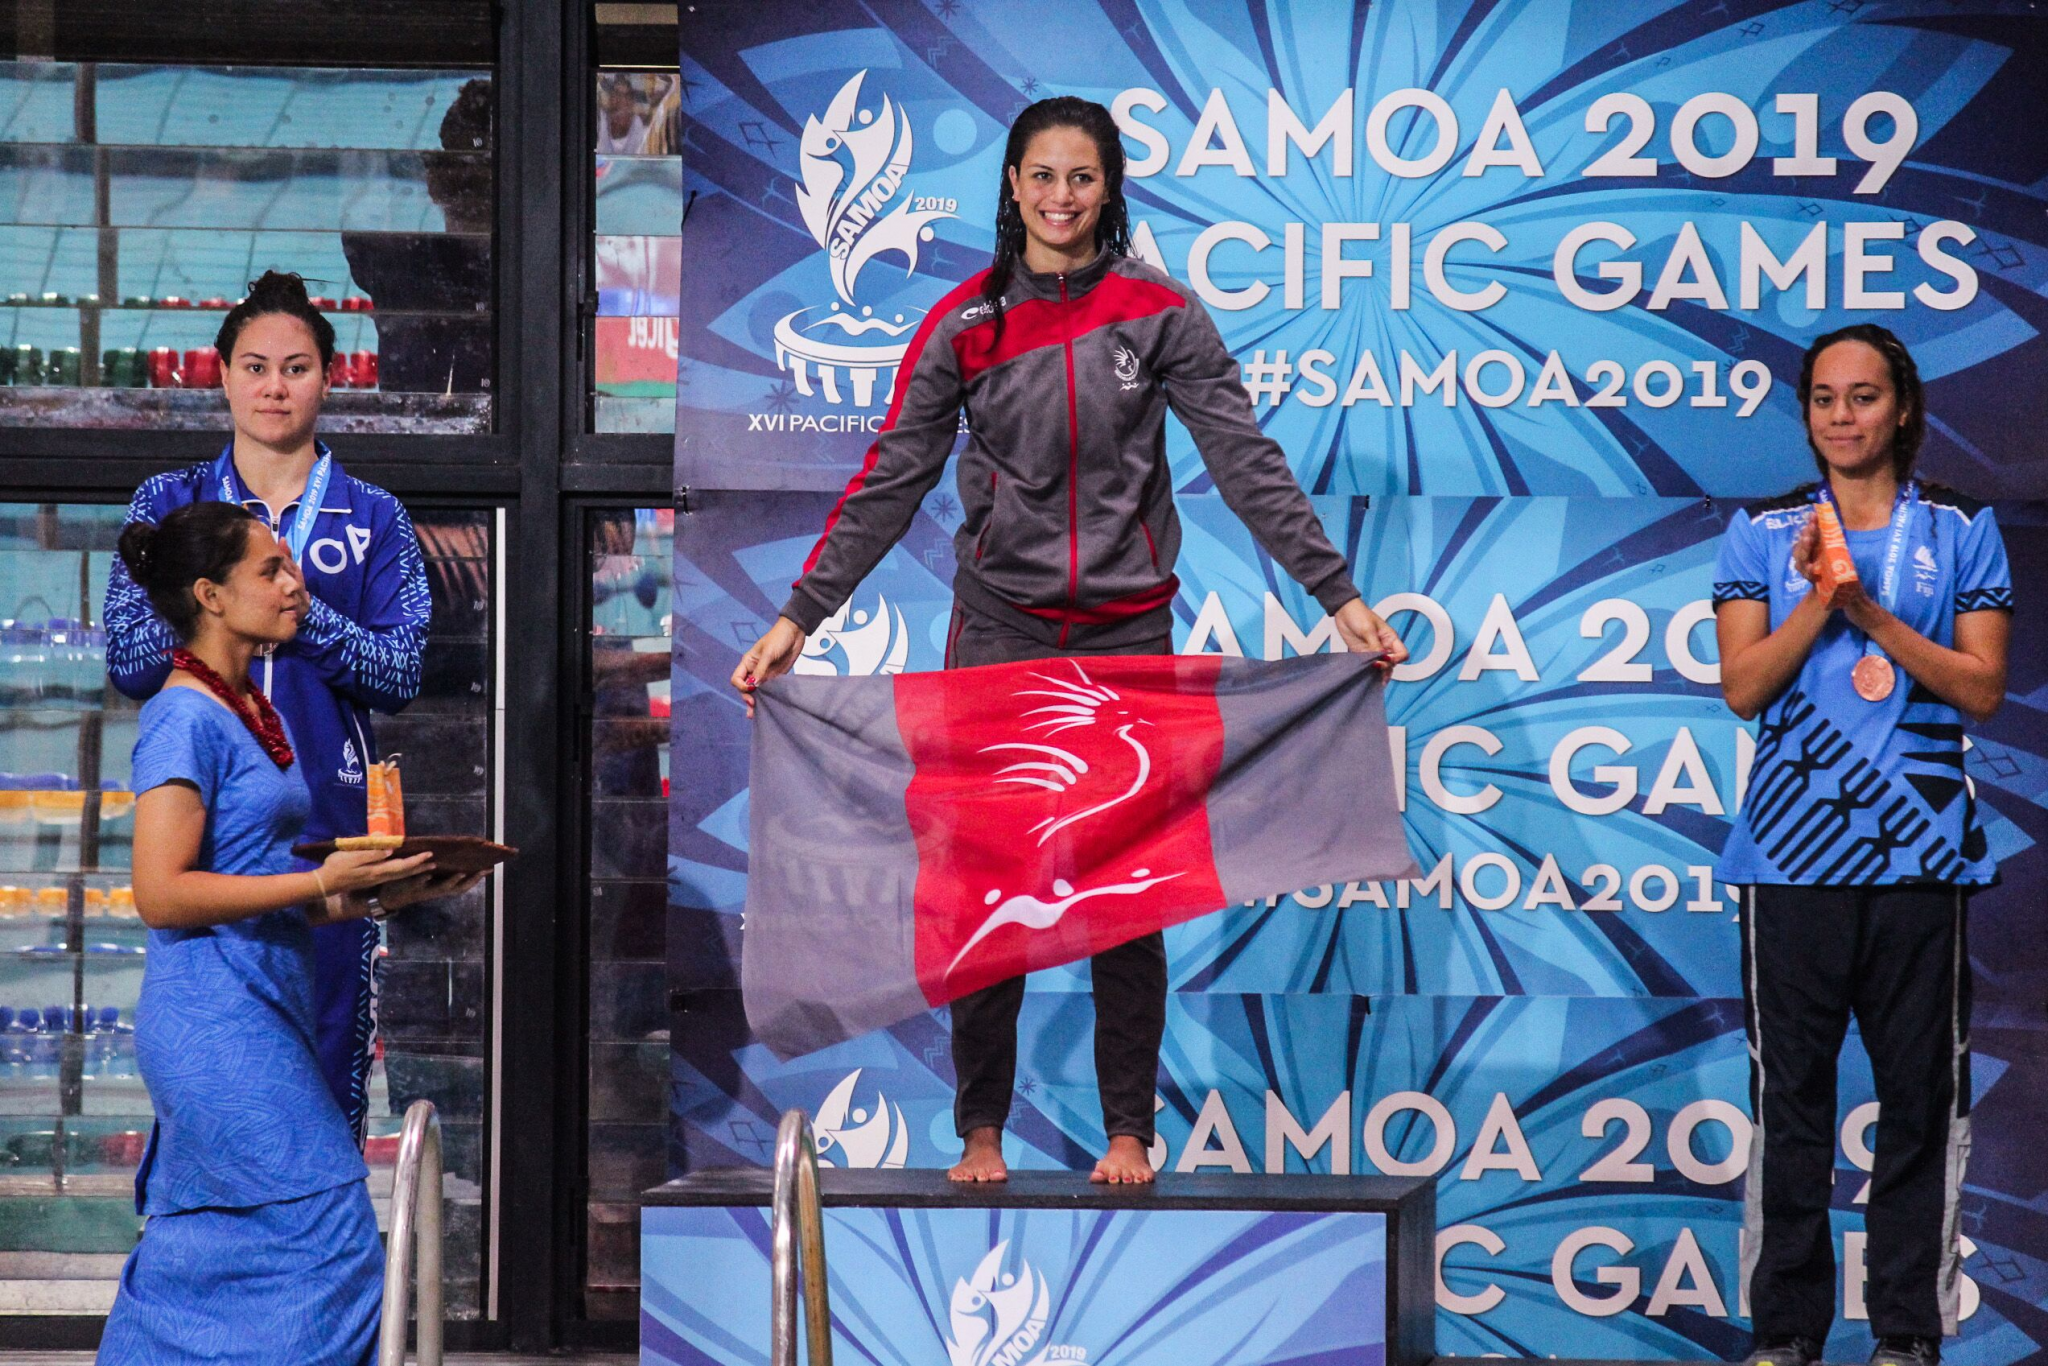 Athletes from the Samoa 2019 Pacific Games will be among those honoured ©Pacific Games News Service